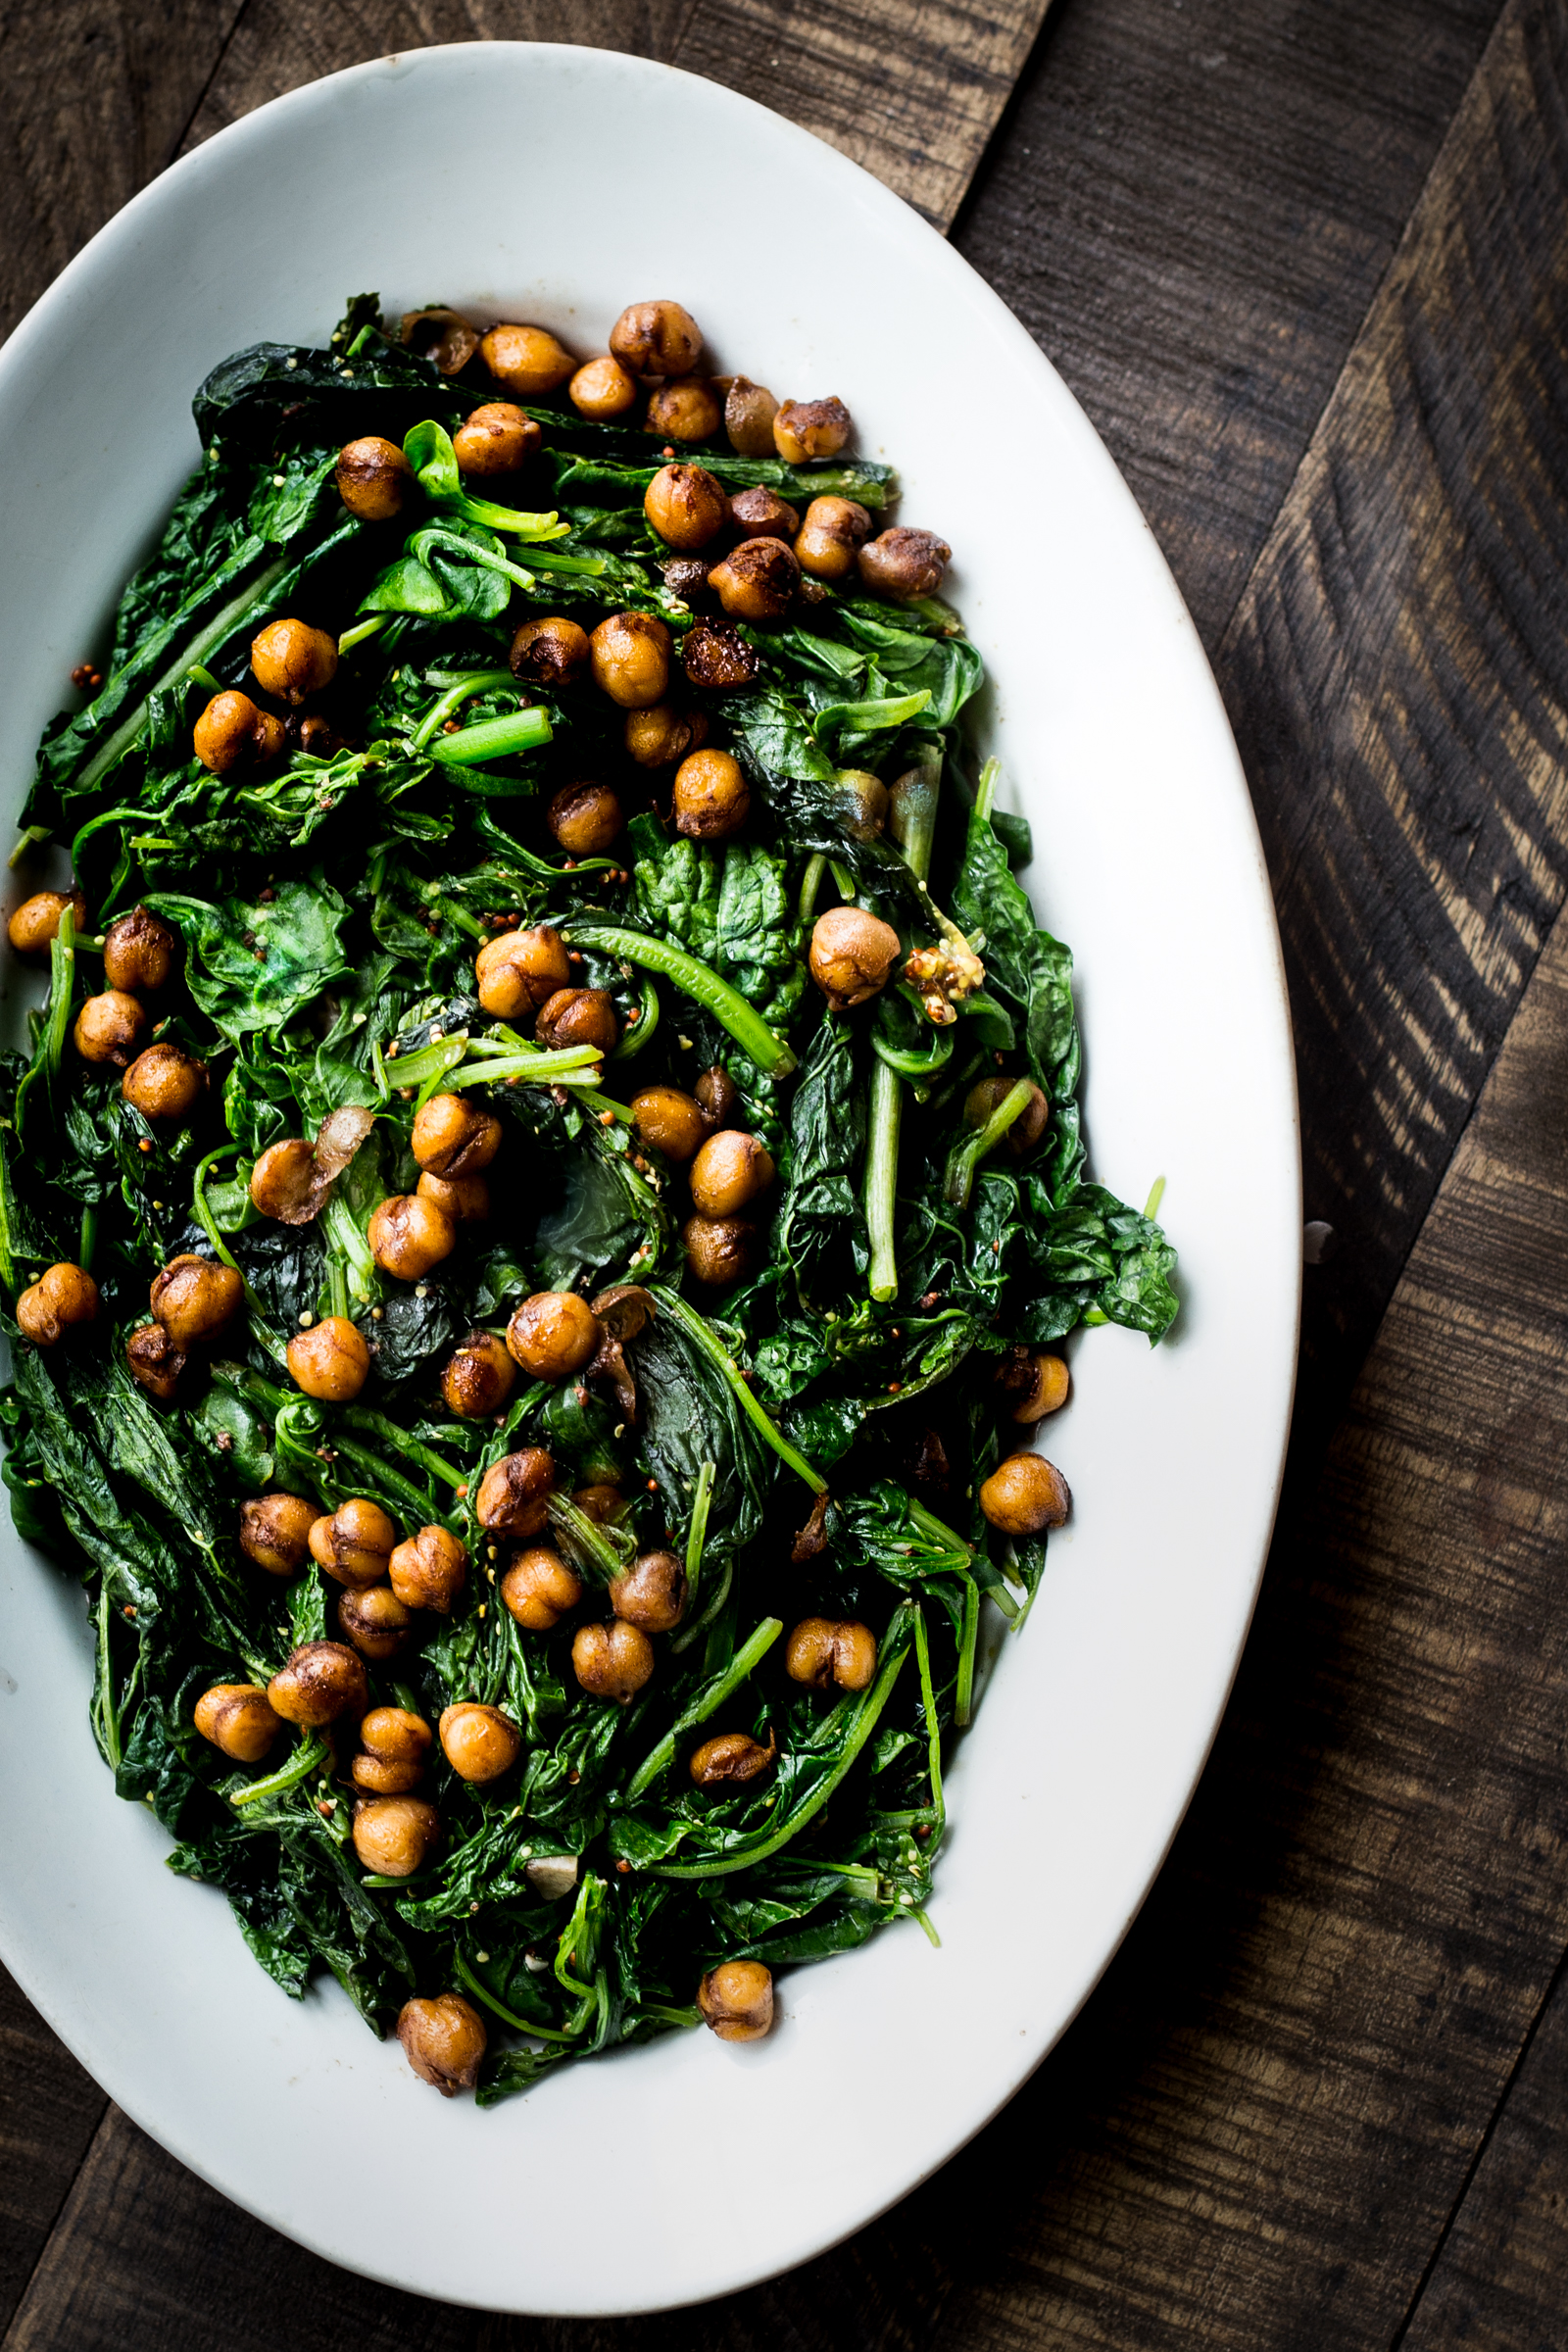 Braised Mustard Greens with Sesame Chickpeas - Dishing Up the Dirt